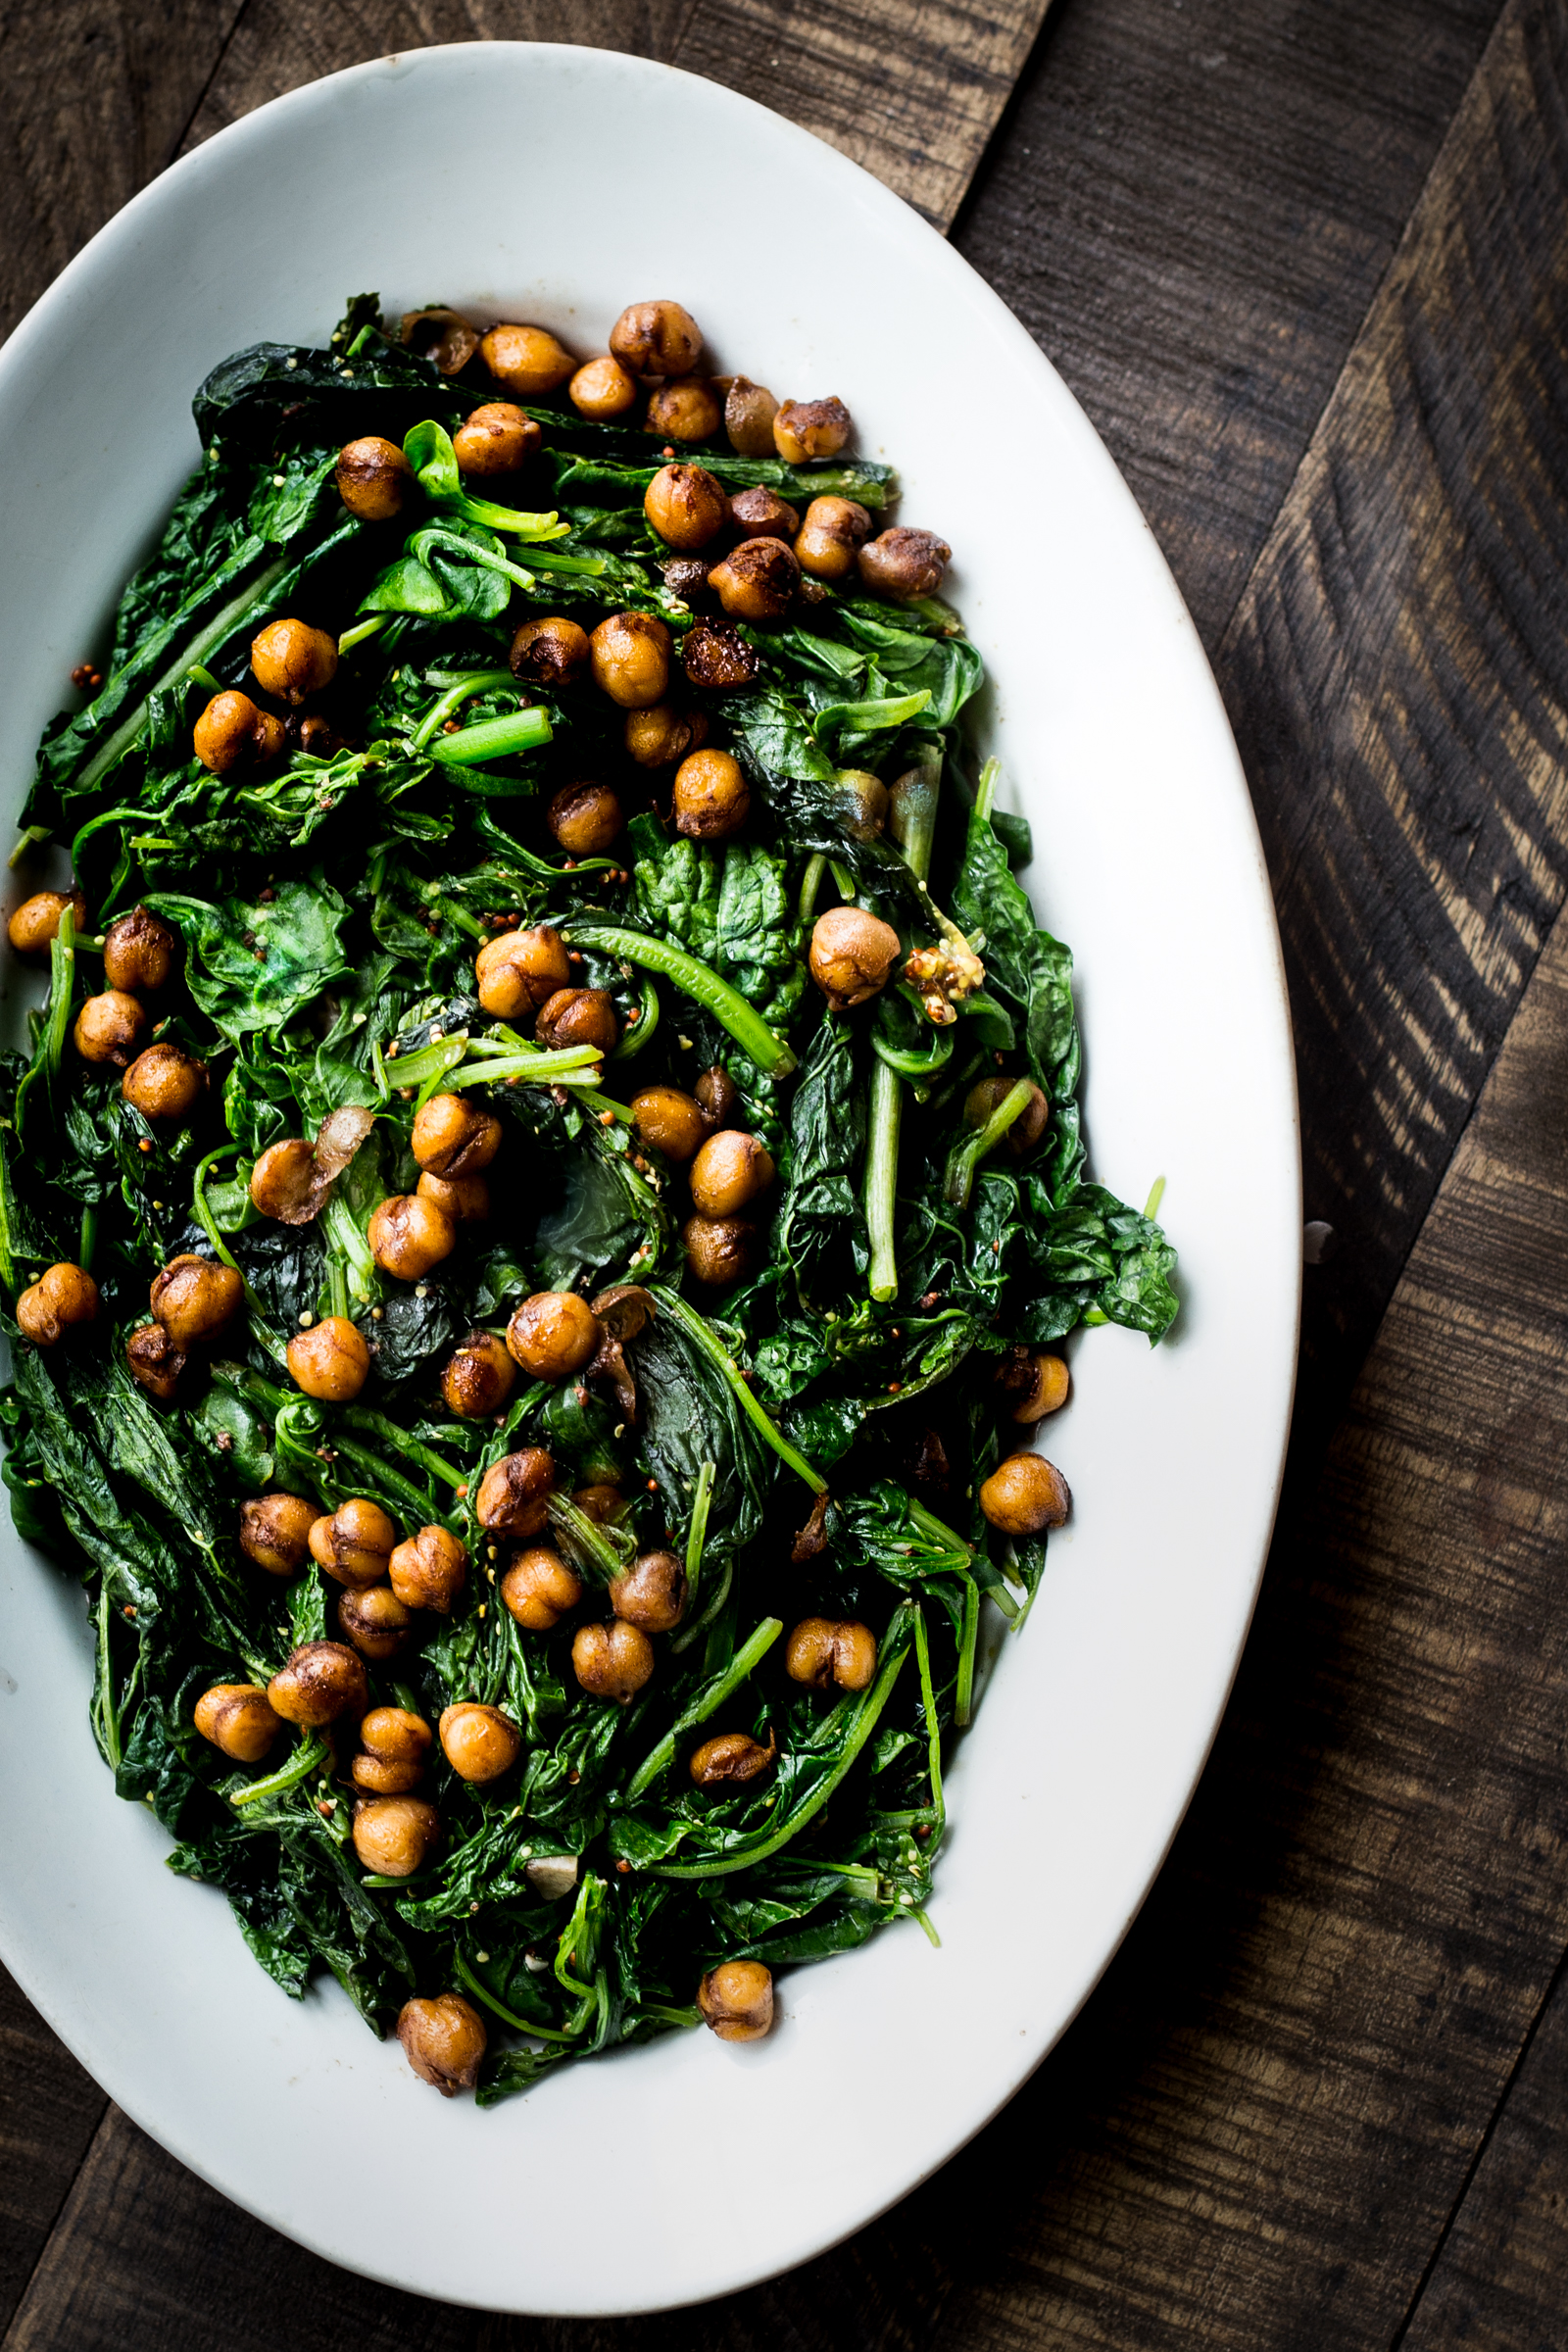 Braised Mustard Greens with Sesame Chickpeas - Dishing Up the Dirt